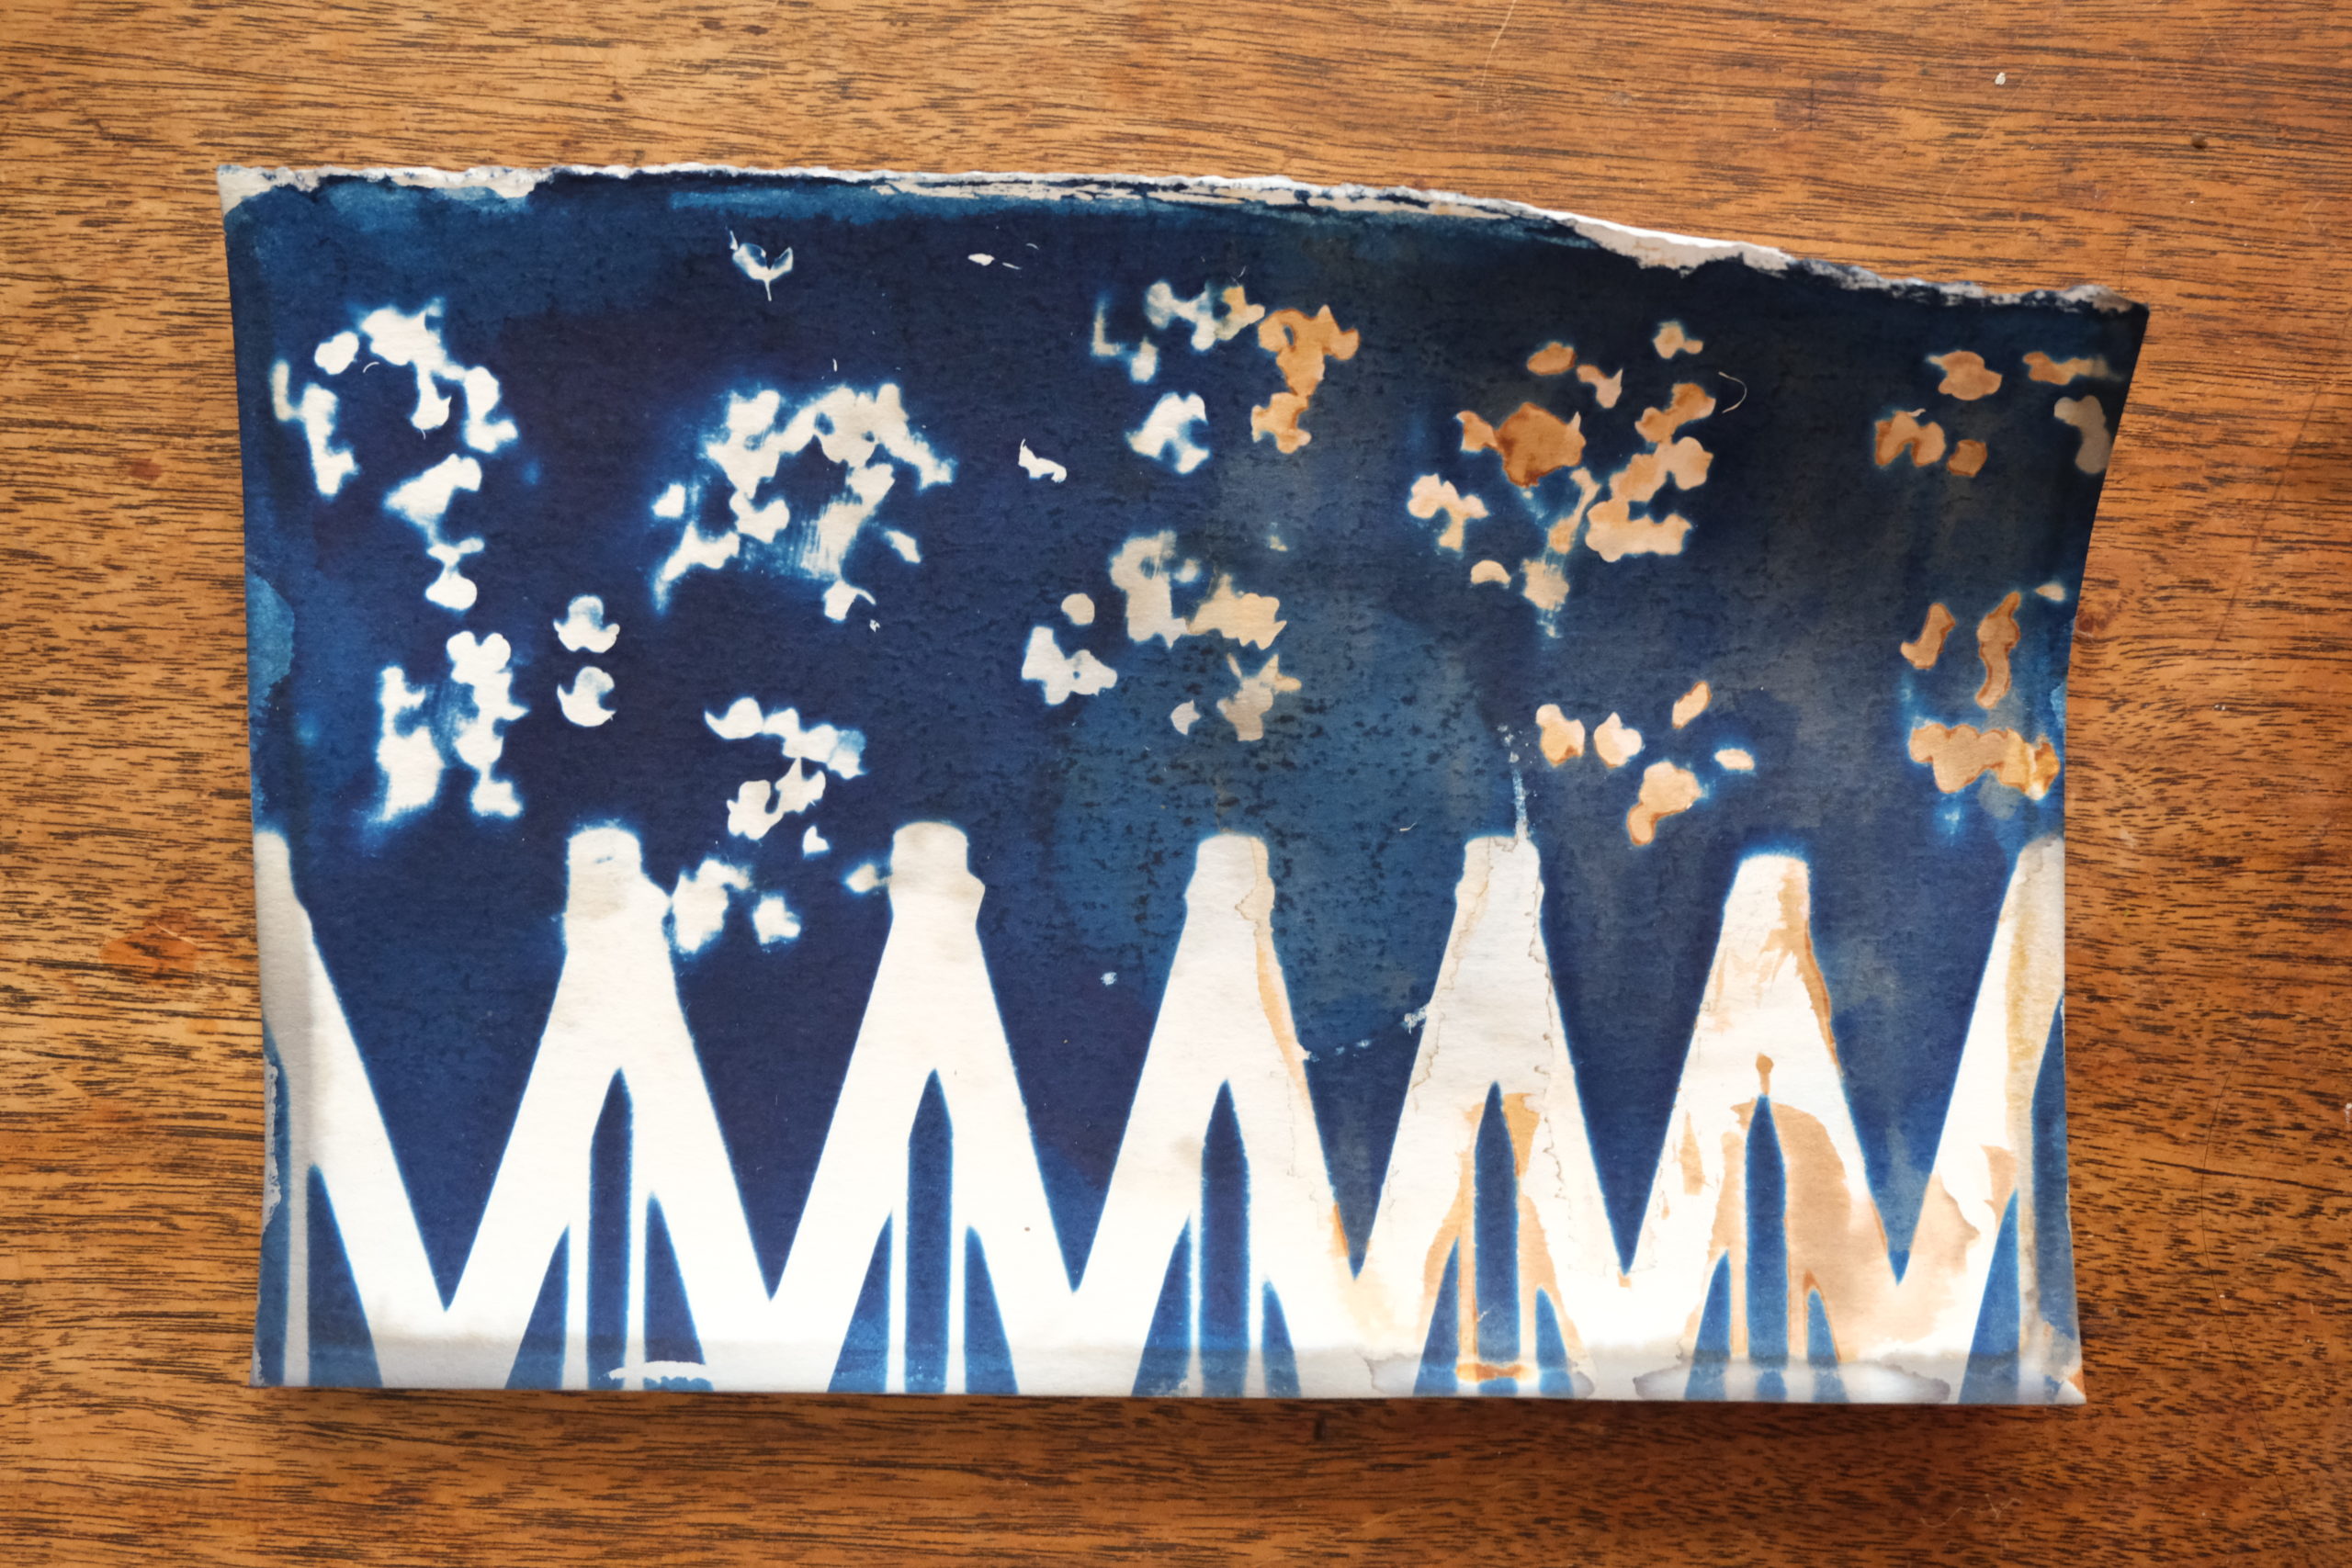 Cyanotype with small clusters of blobs at the top (made by chive blossoms) and a zig zagging, repeating shape across the bottom half (made by a pasta cutter). The right half of the cyanotype has been bleached and toned with silver nitrate, making the previously while areas light brown and the blue areas a muddy and dull blue.